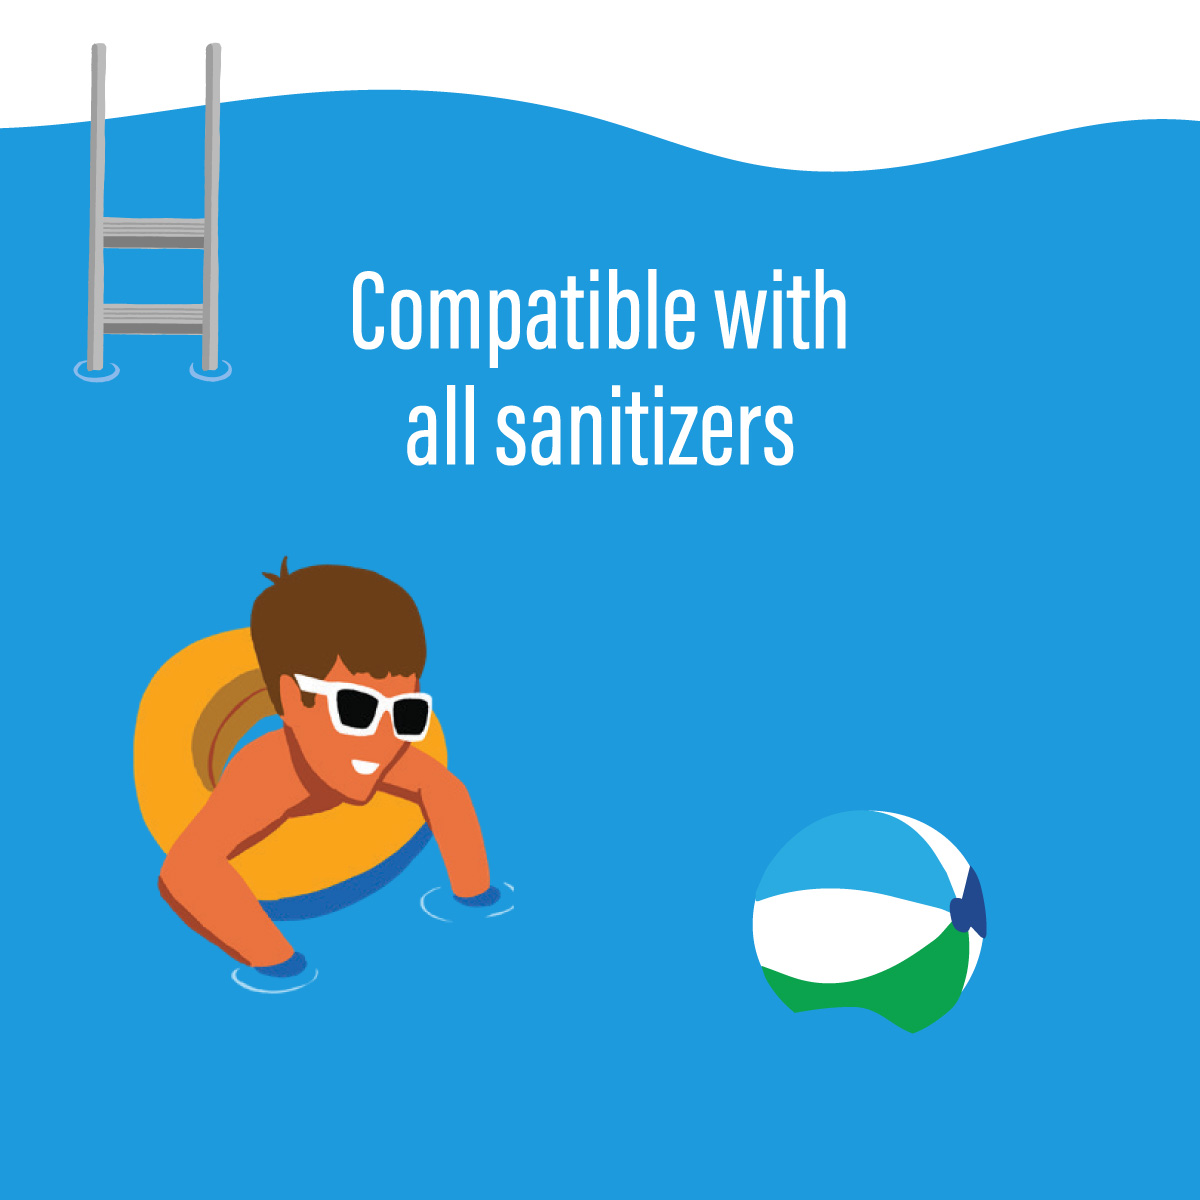 Icon of boy wearing sunglasses floating in blue pool with claim of "Compatible with all sanitizers"